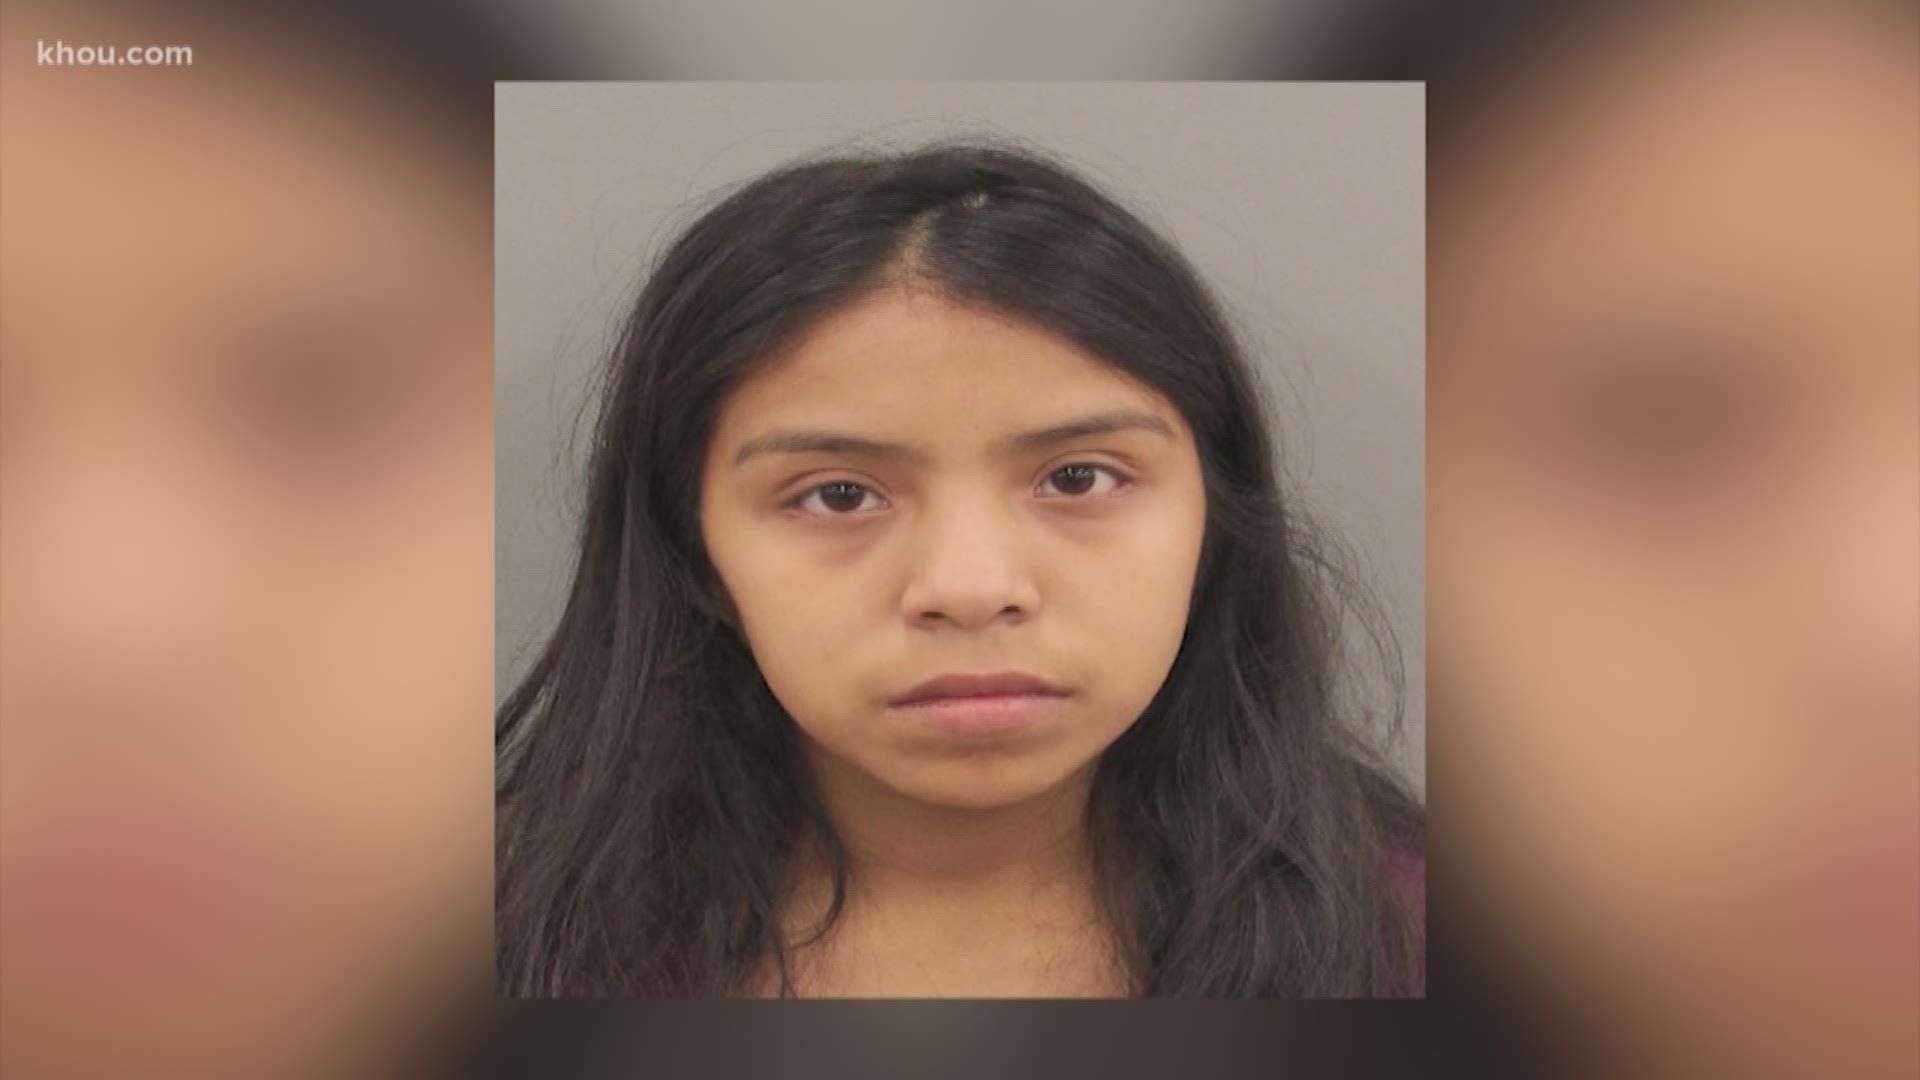 A mother has been charged in connection with the death of her infant son after he was hit by a car in a parking lot.